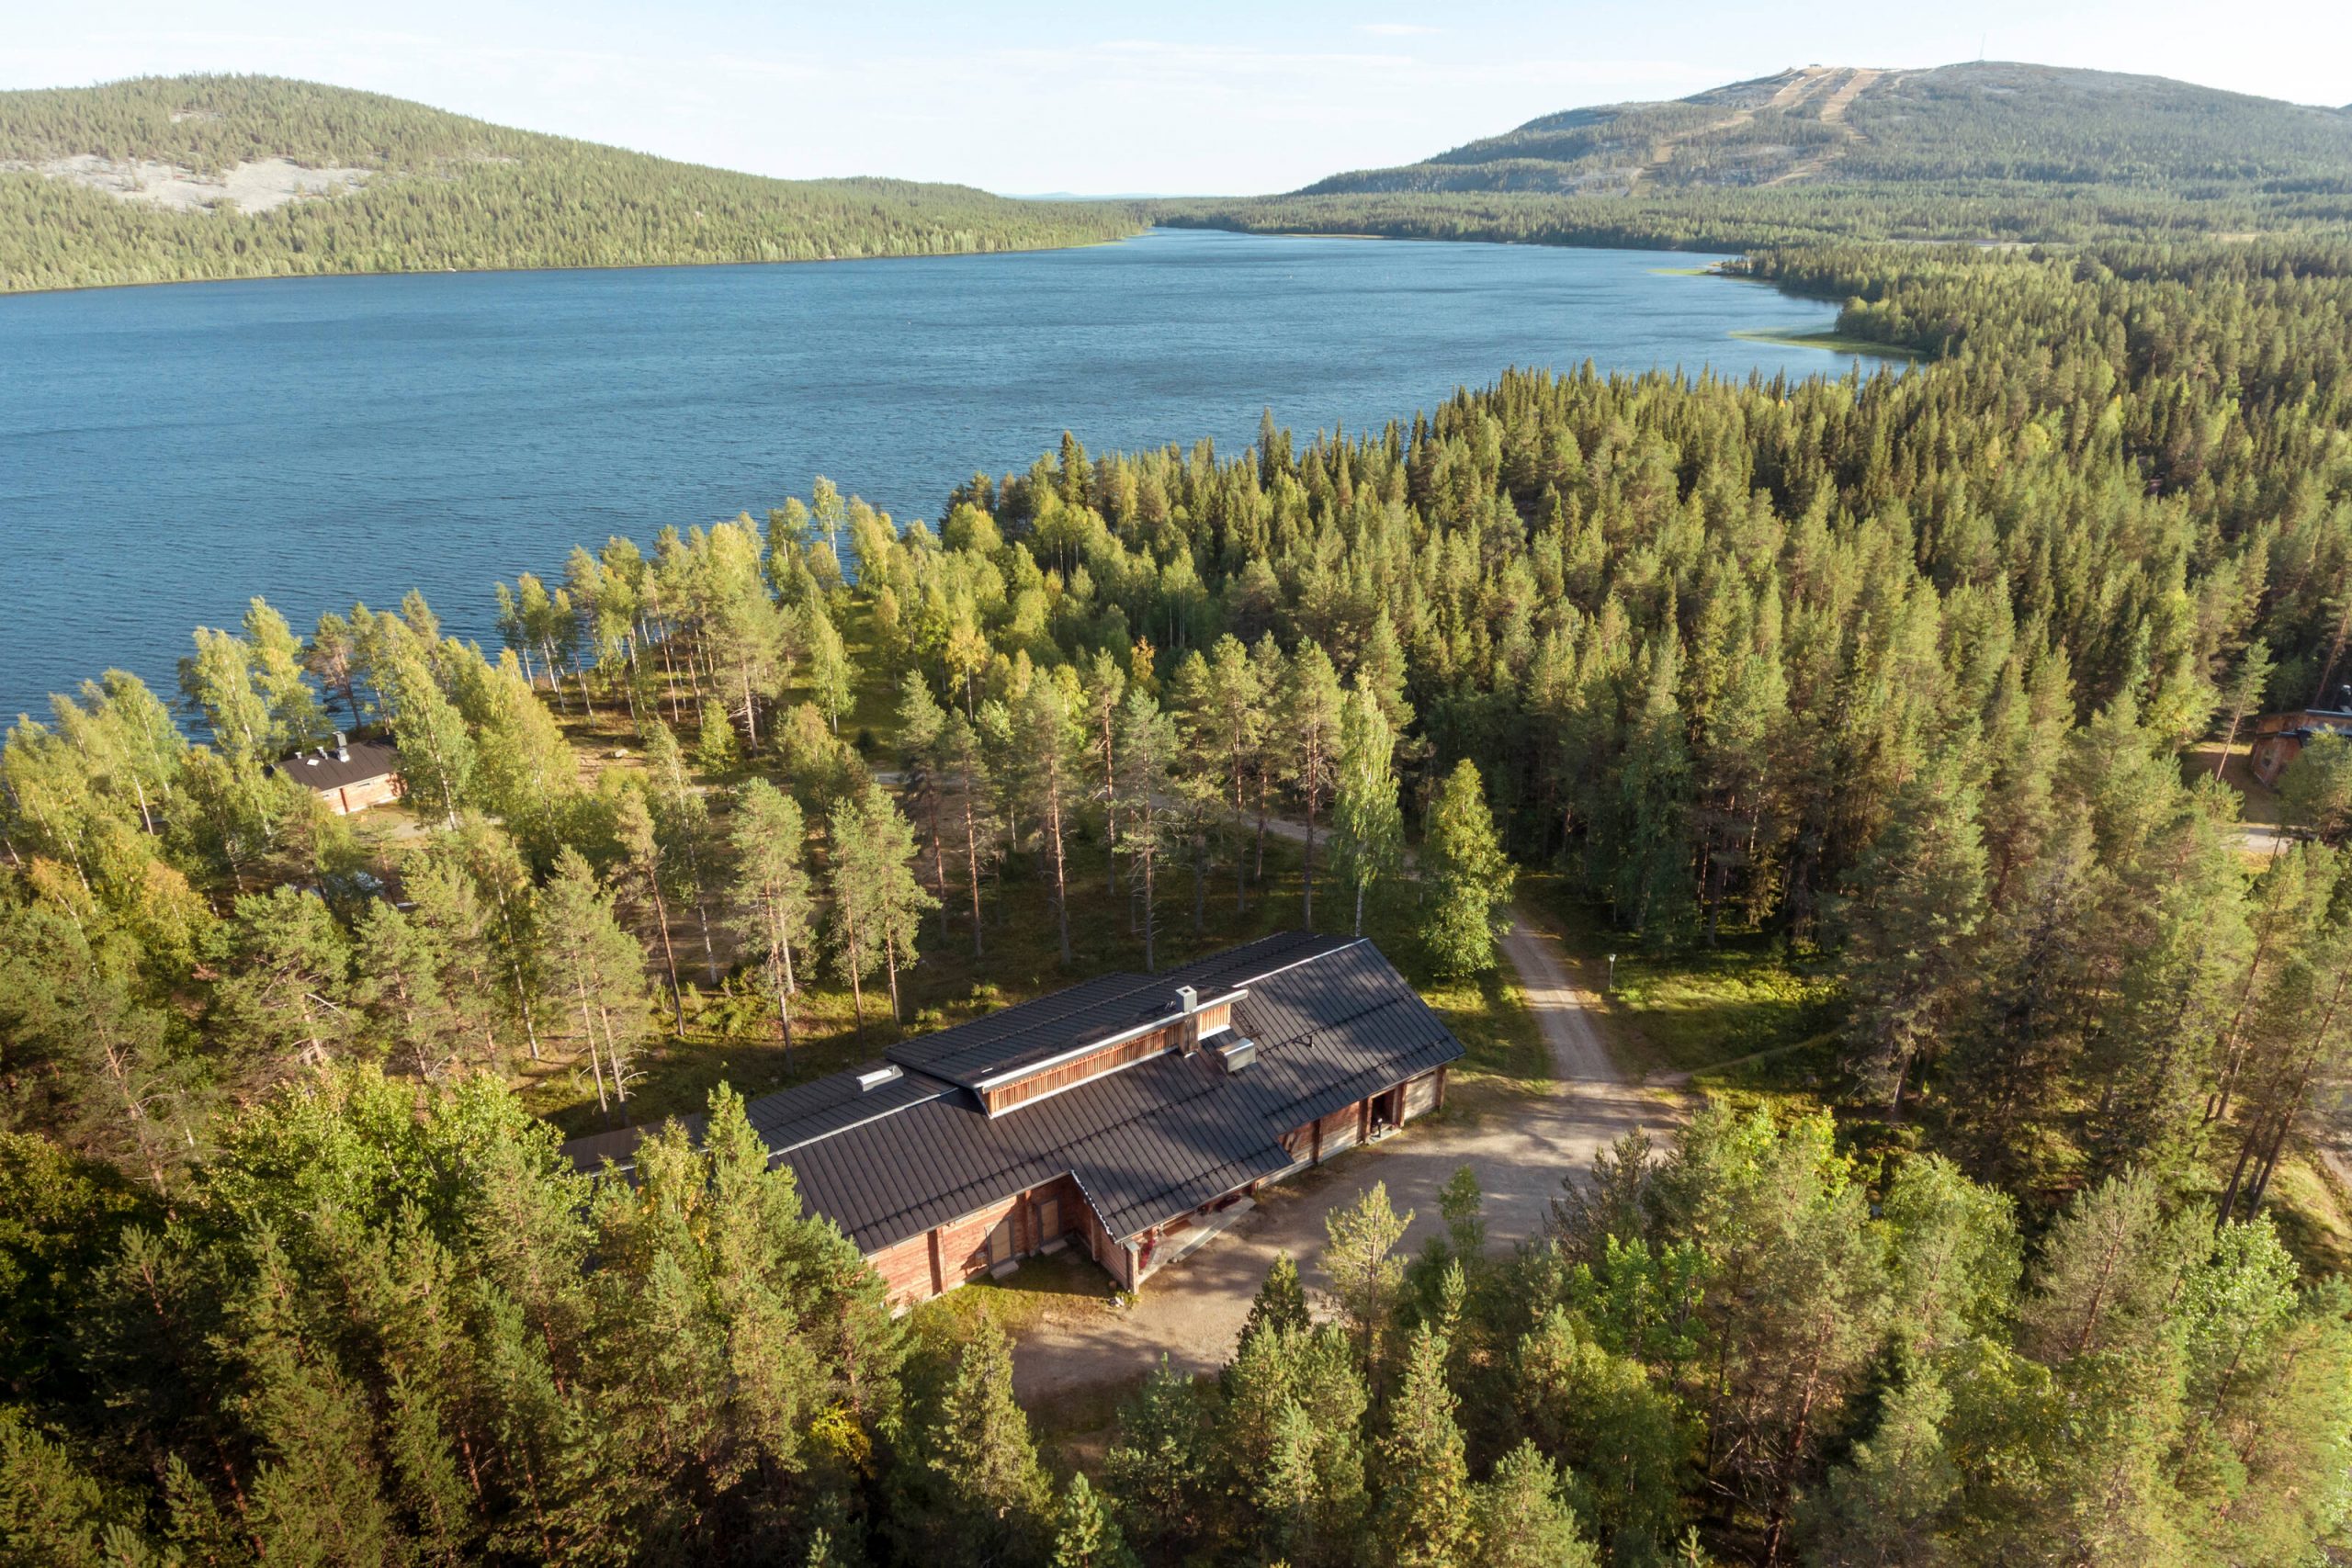 An aerial view of a resort in a private forest setting in Finnish Lapland.